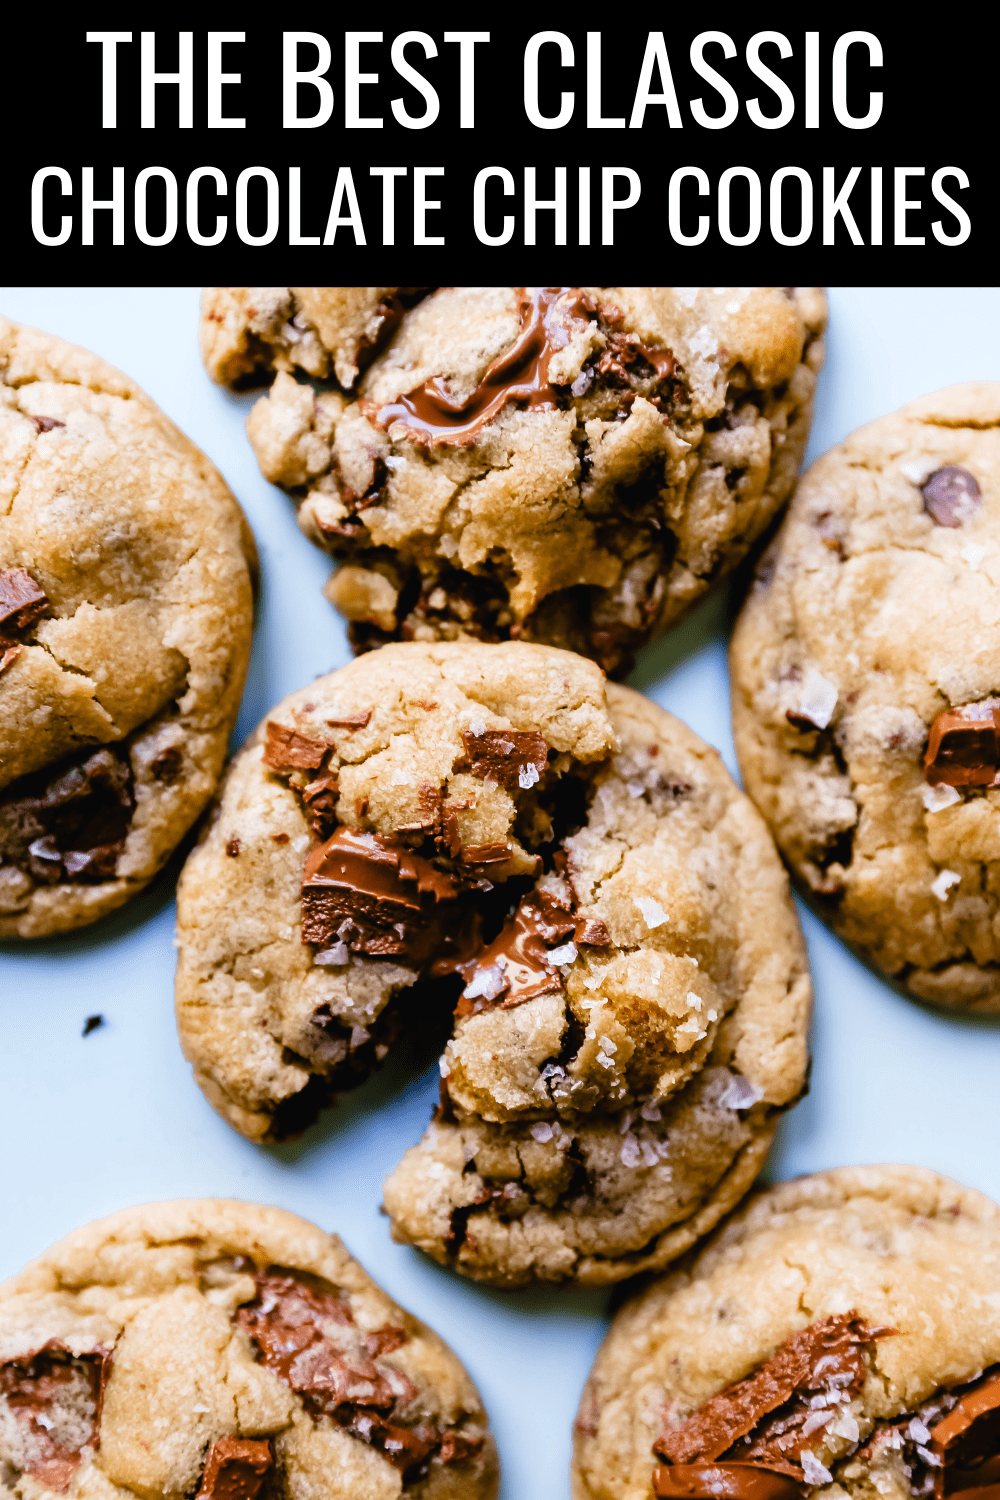 Classic Chocolate Chip Cookies A classic soft, chewy, chocolate chip cookie recipe. This is such a popular chocolate chip cookie recipe! #cookies #chocolatechipcookies